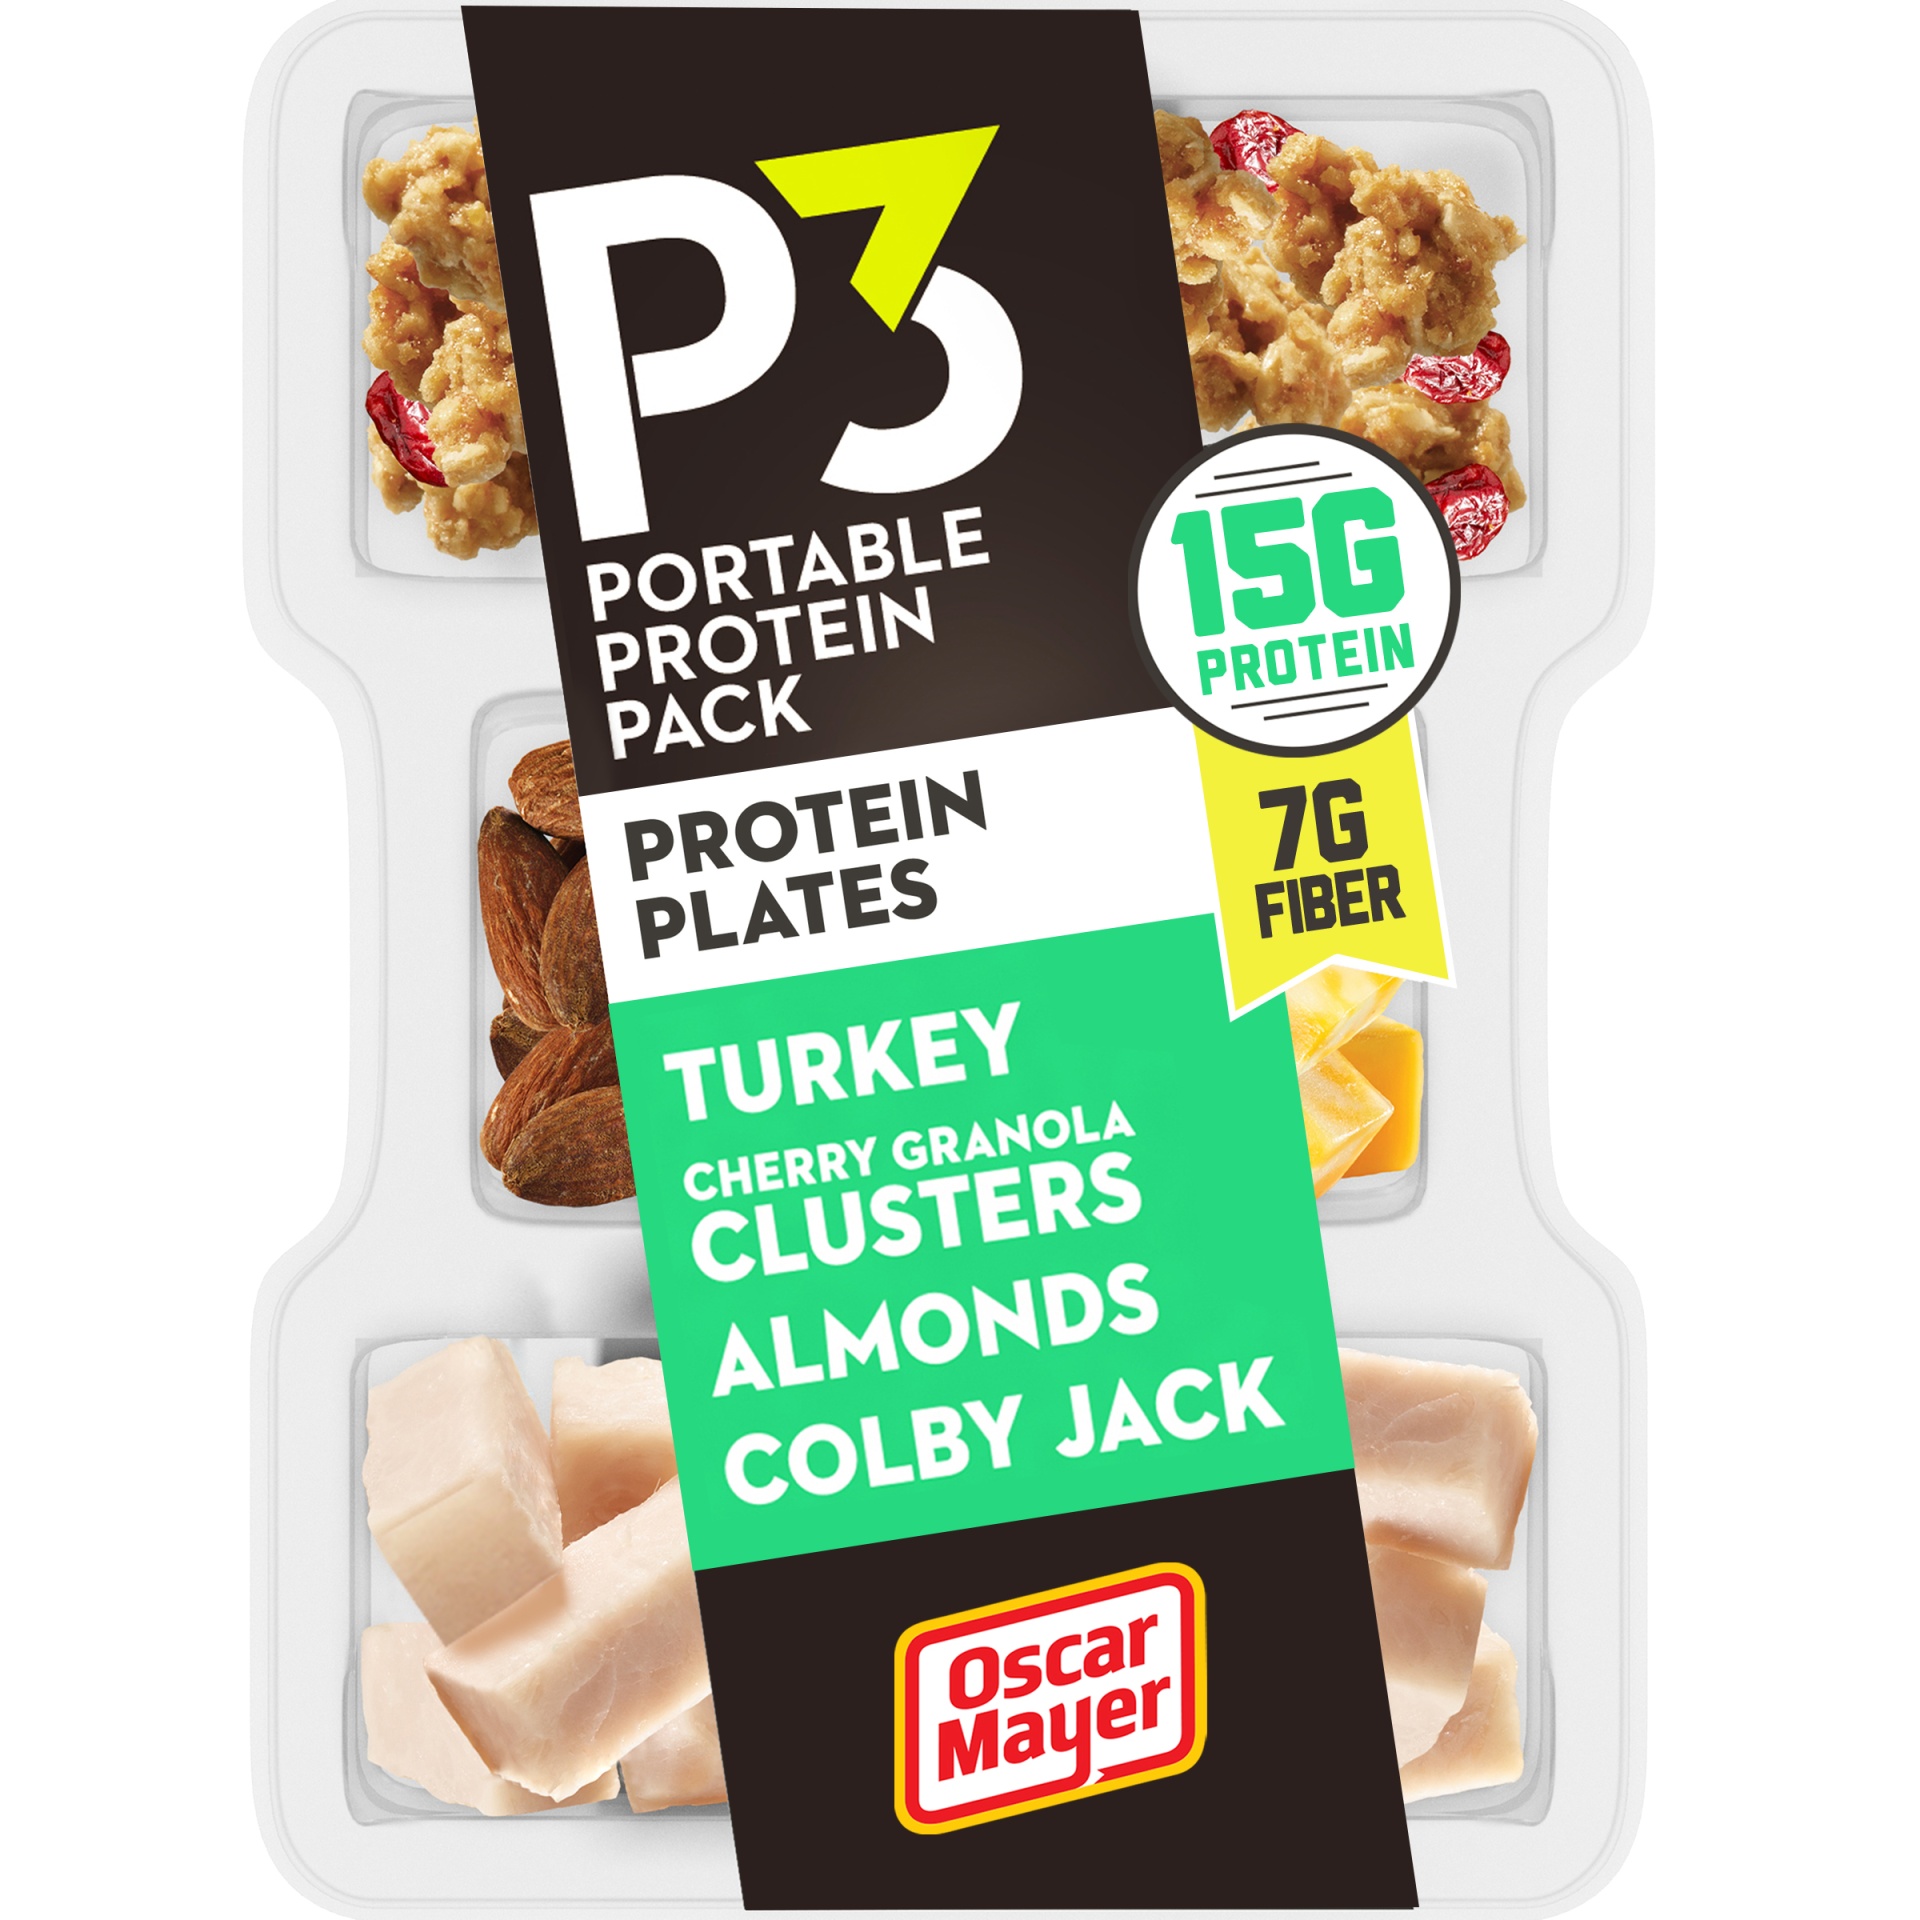 slide 1 of 6, P3 Portable Protein Snack Pack & Fiber Plate with Turkey, Cherry Granola Clusters, Almonds & Colby Jack Cheese Tray, 3.2 oz